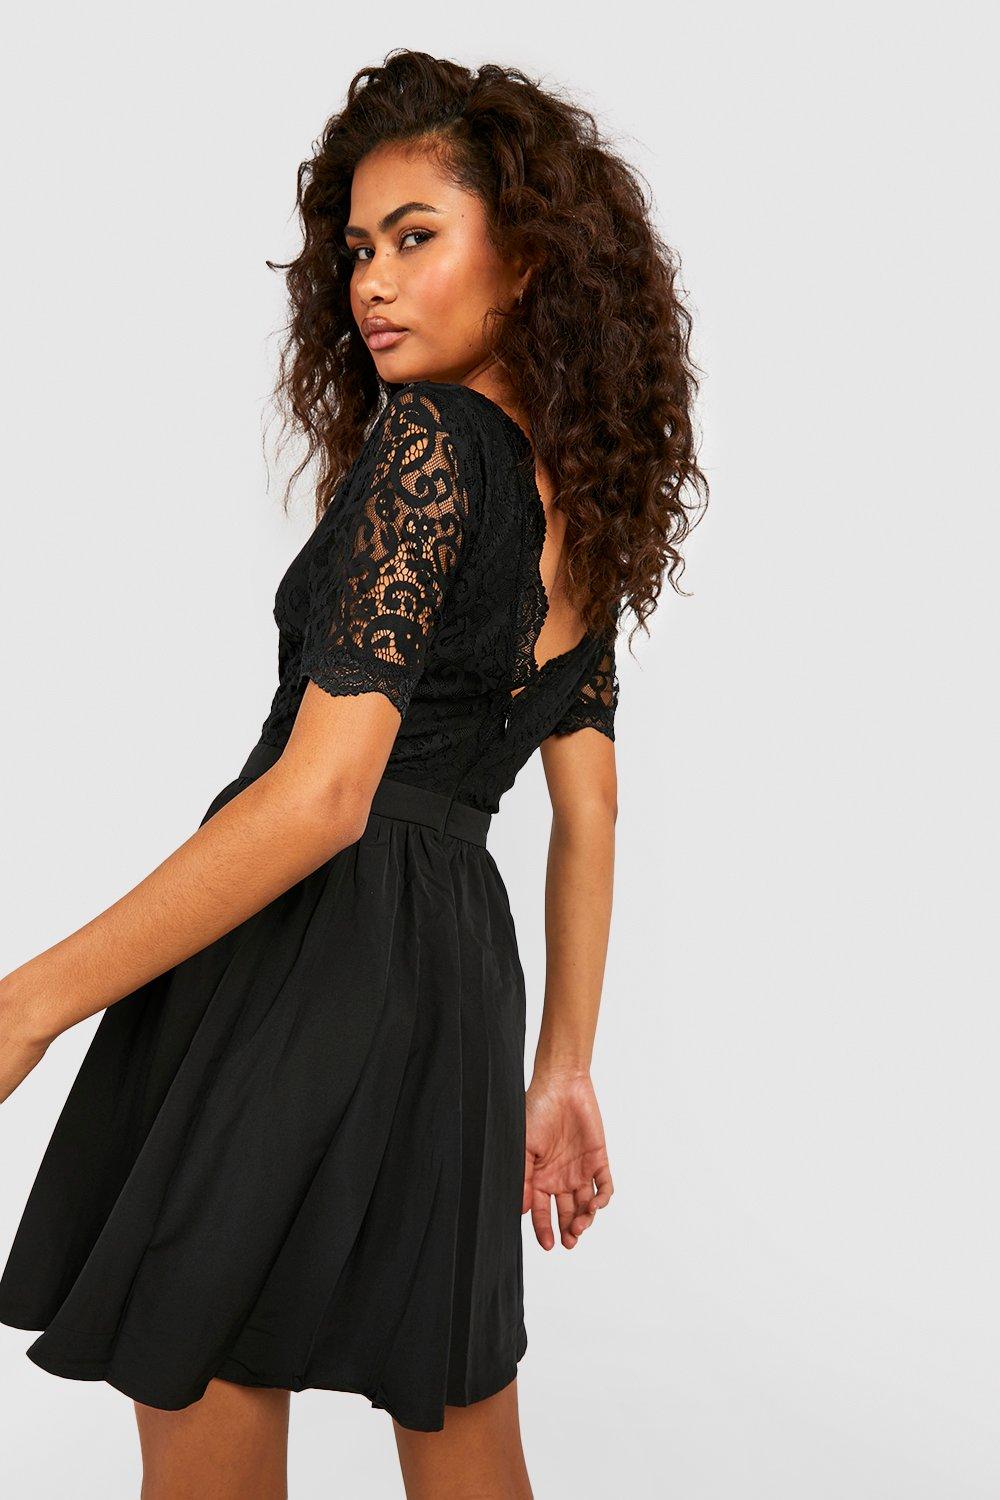 Introduction to the Black Lace Top Dress